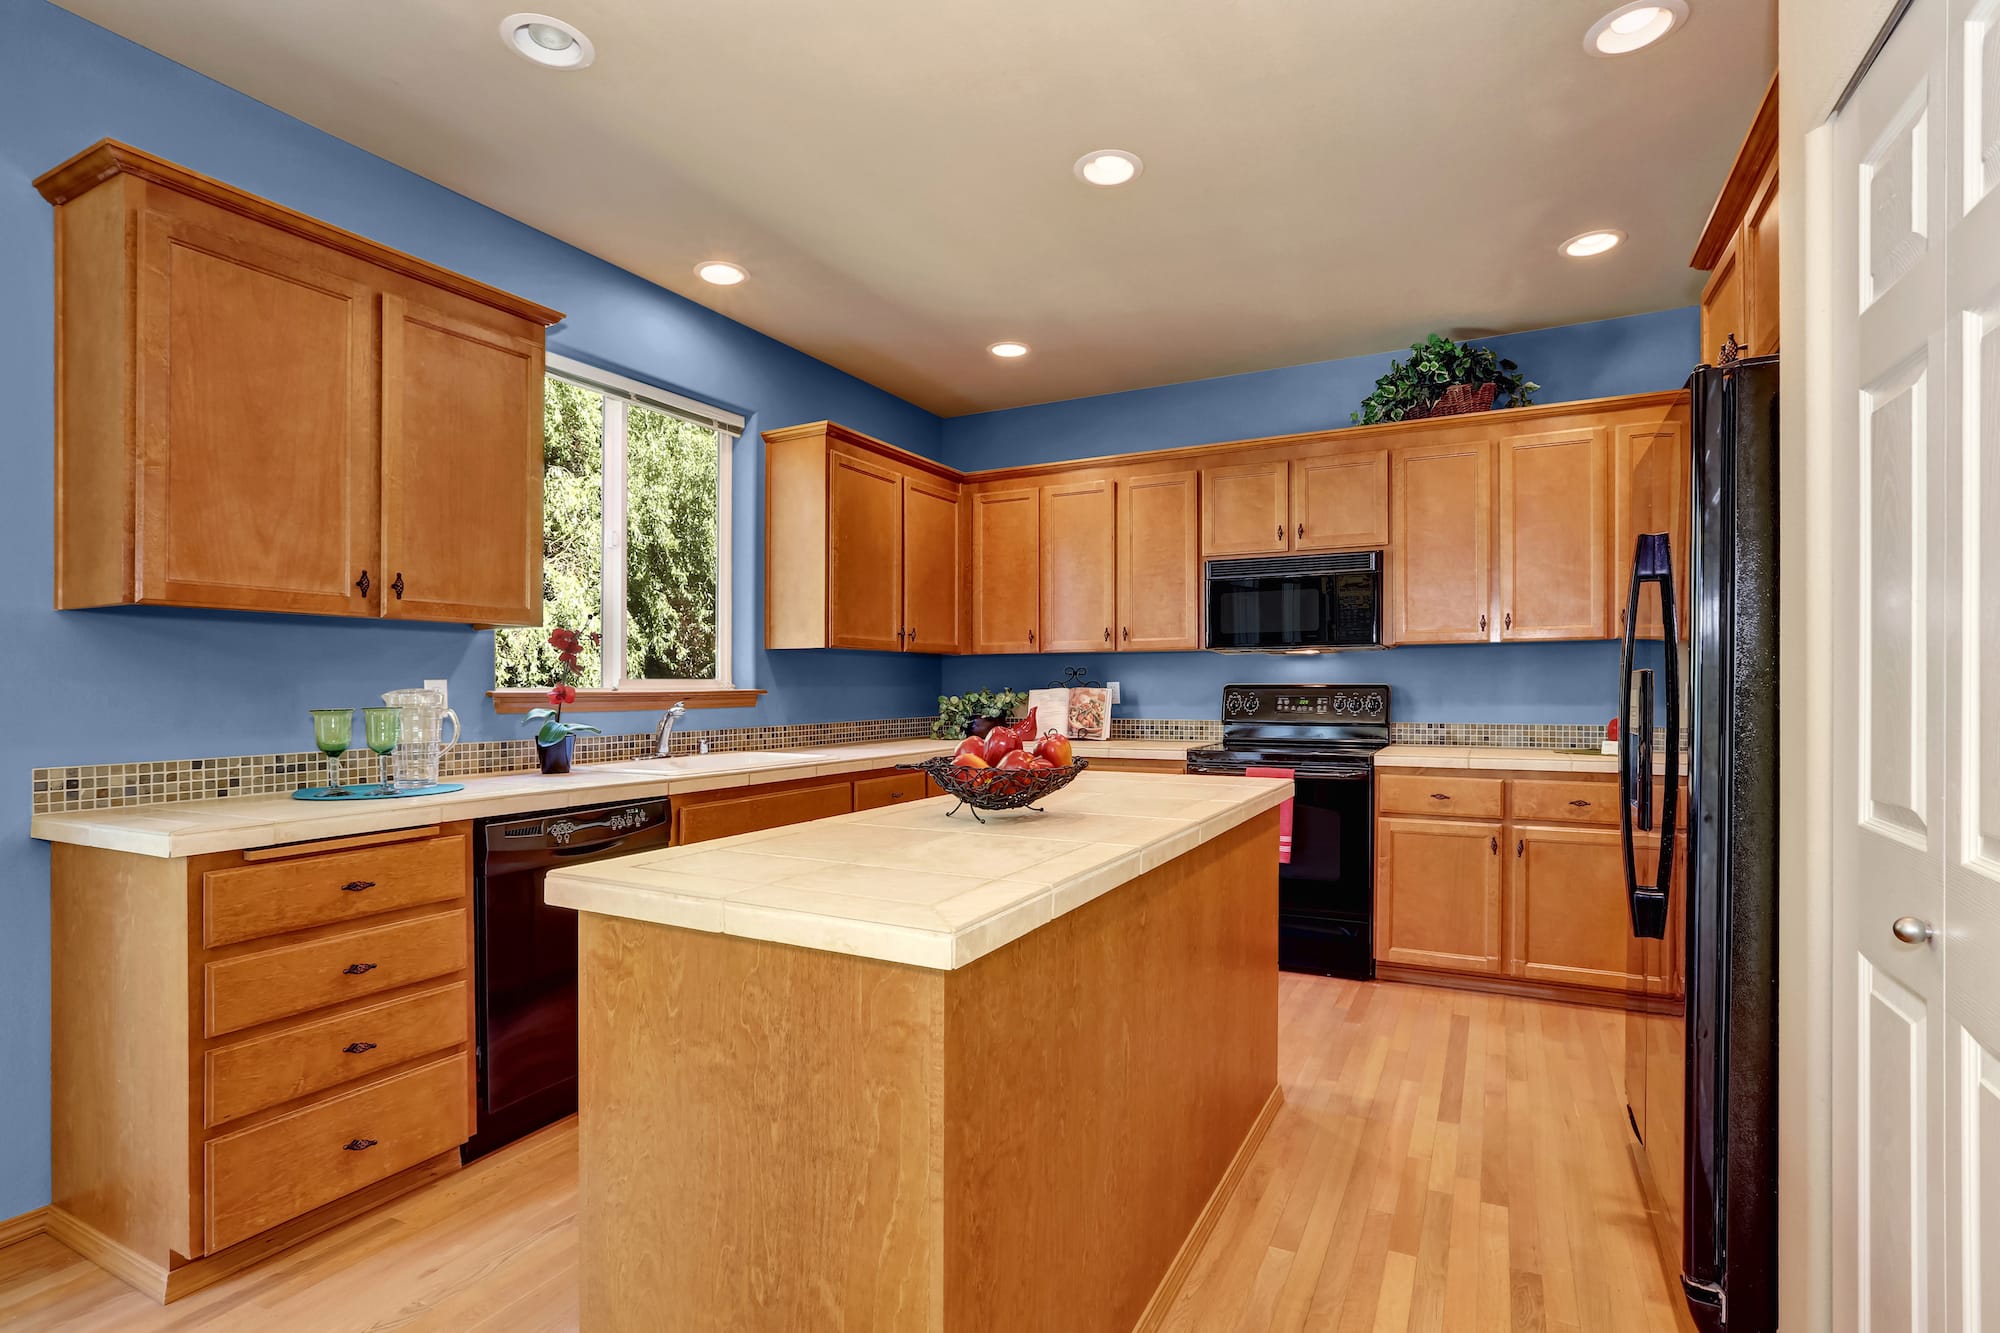 Paint Colors That Go with Honey Oak Cabinets and Trim